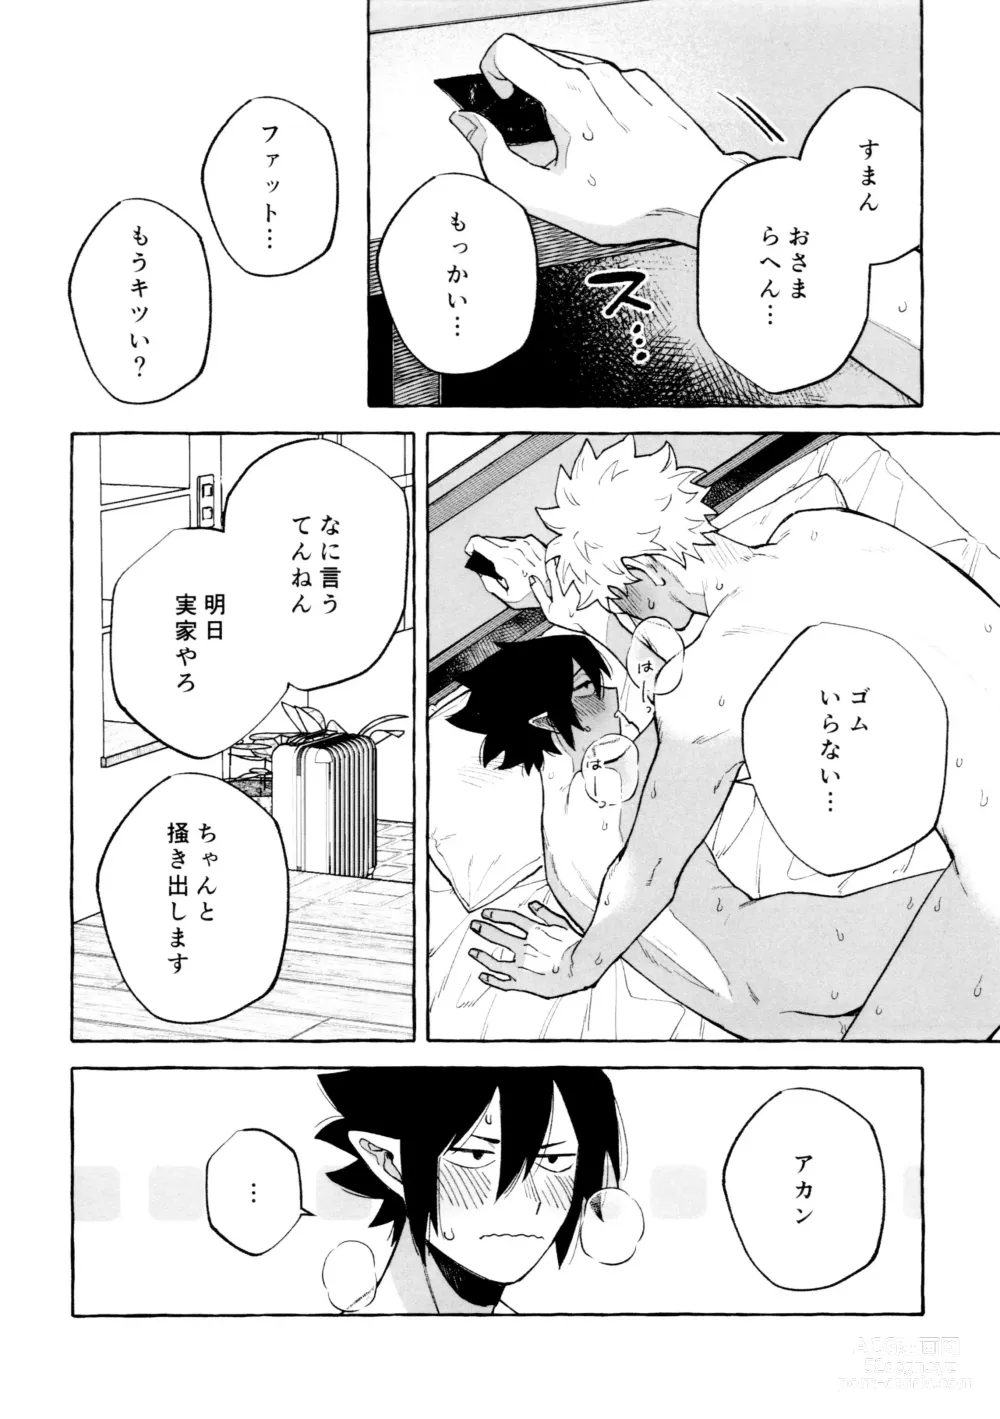 Page 24 of doujinshi Please please